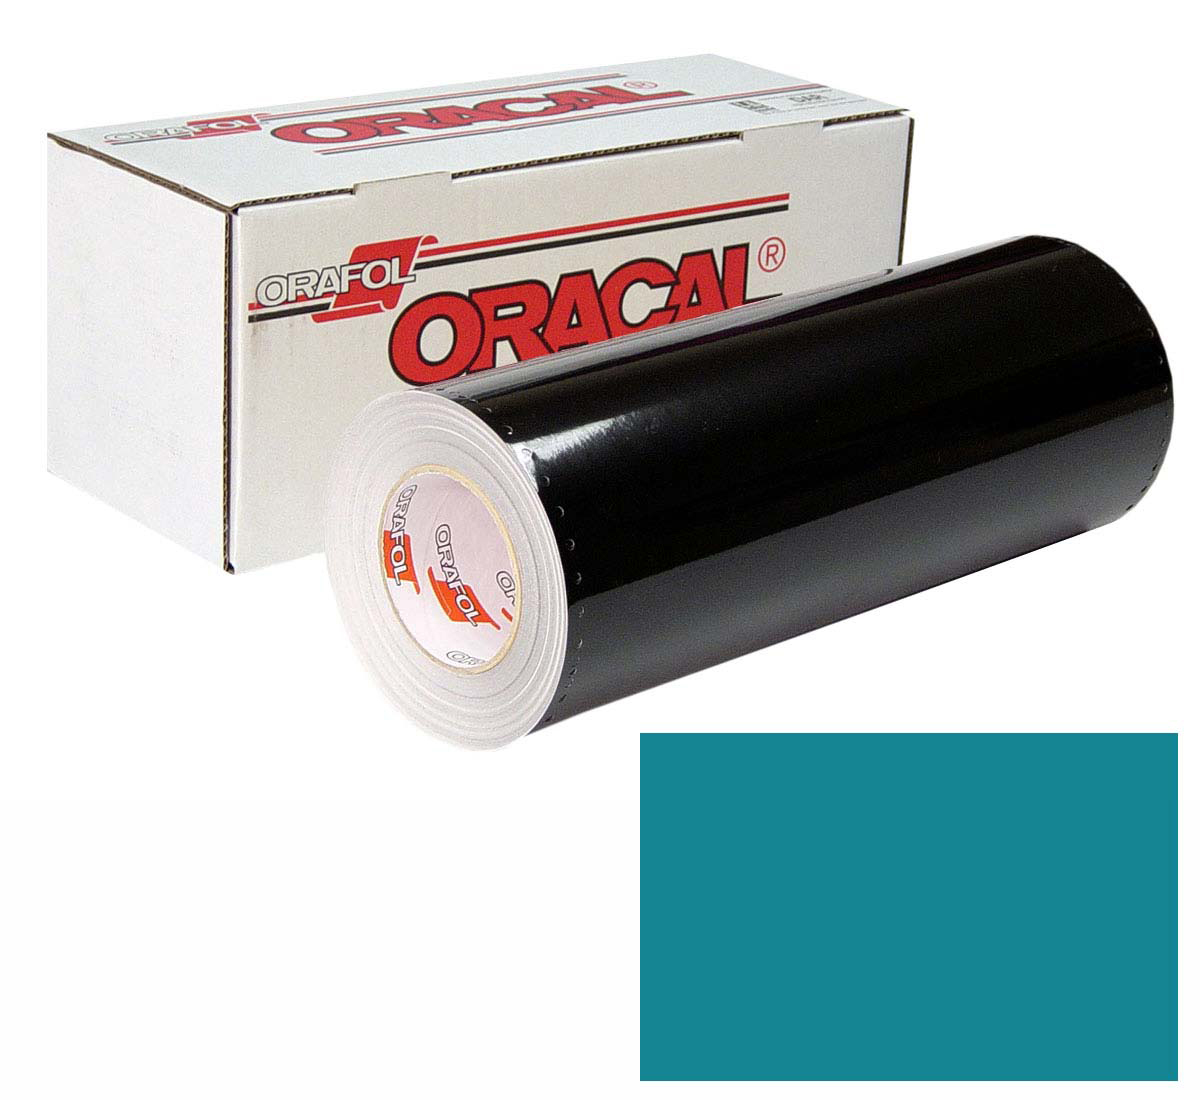 ORACAL 641 30in X 50yd 066 Turquoise Blue